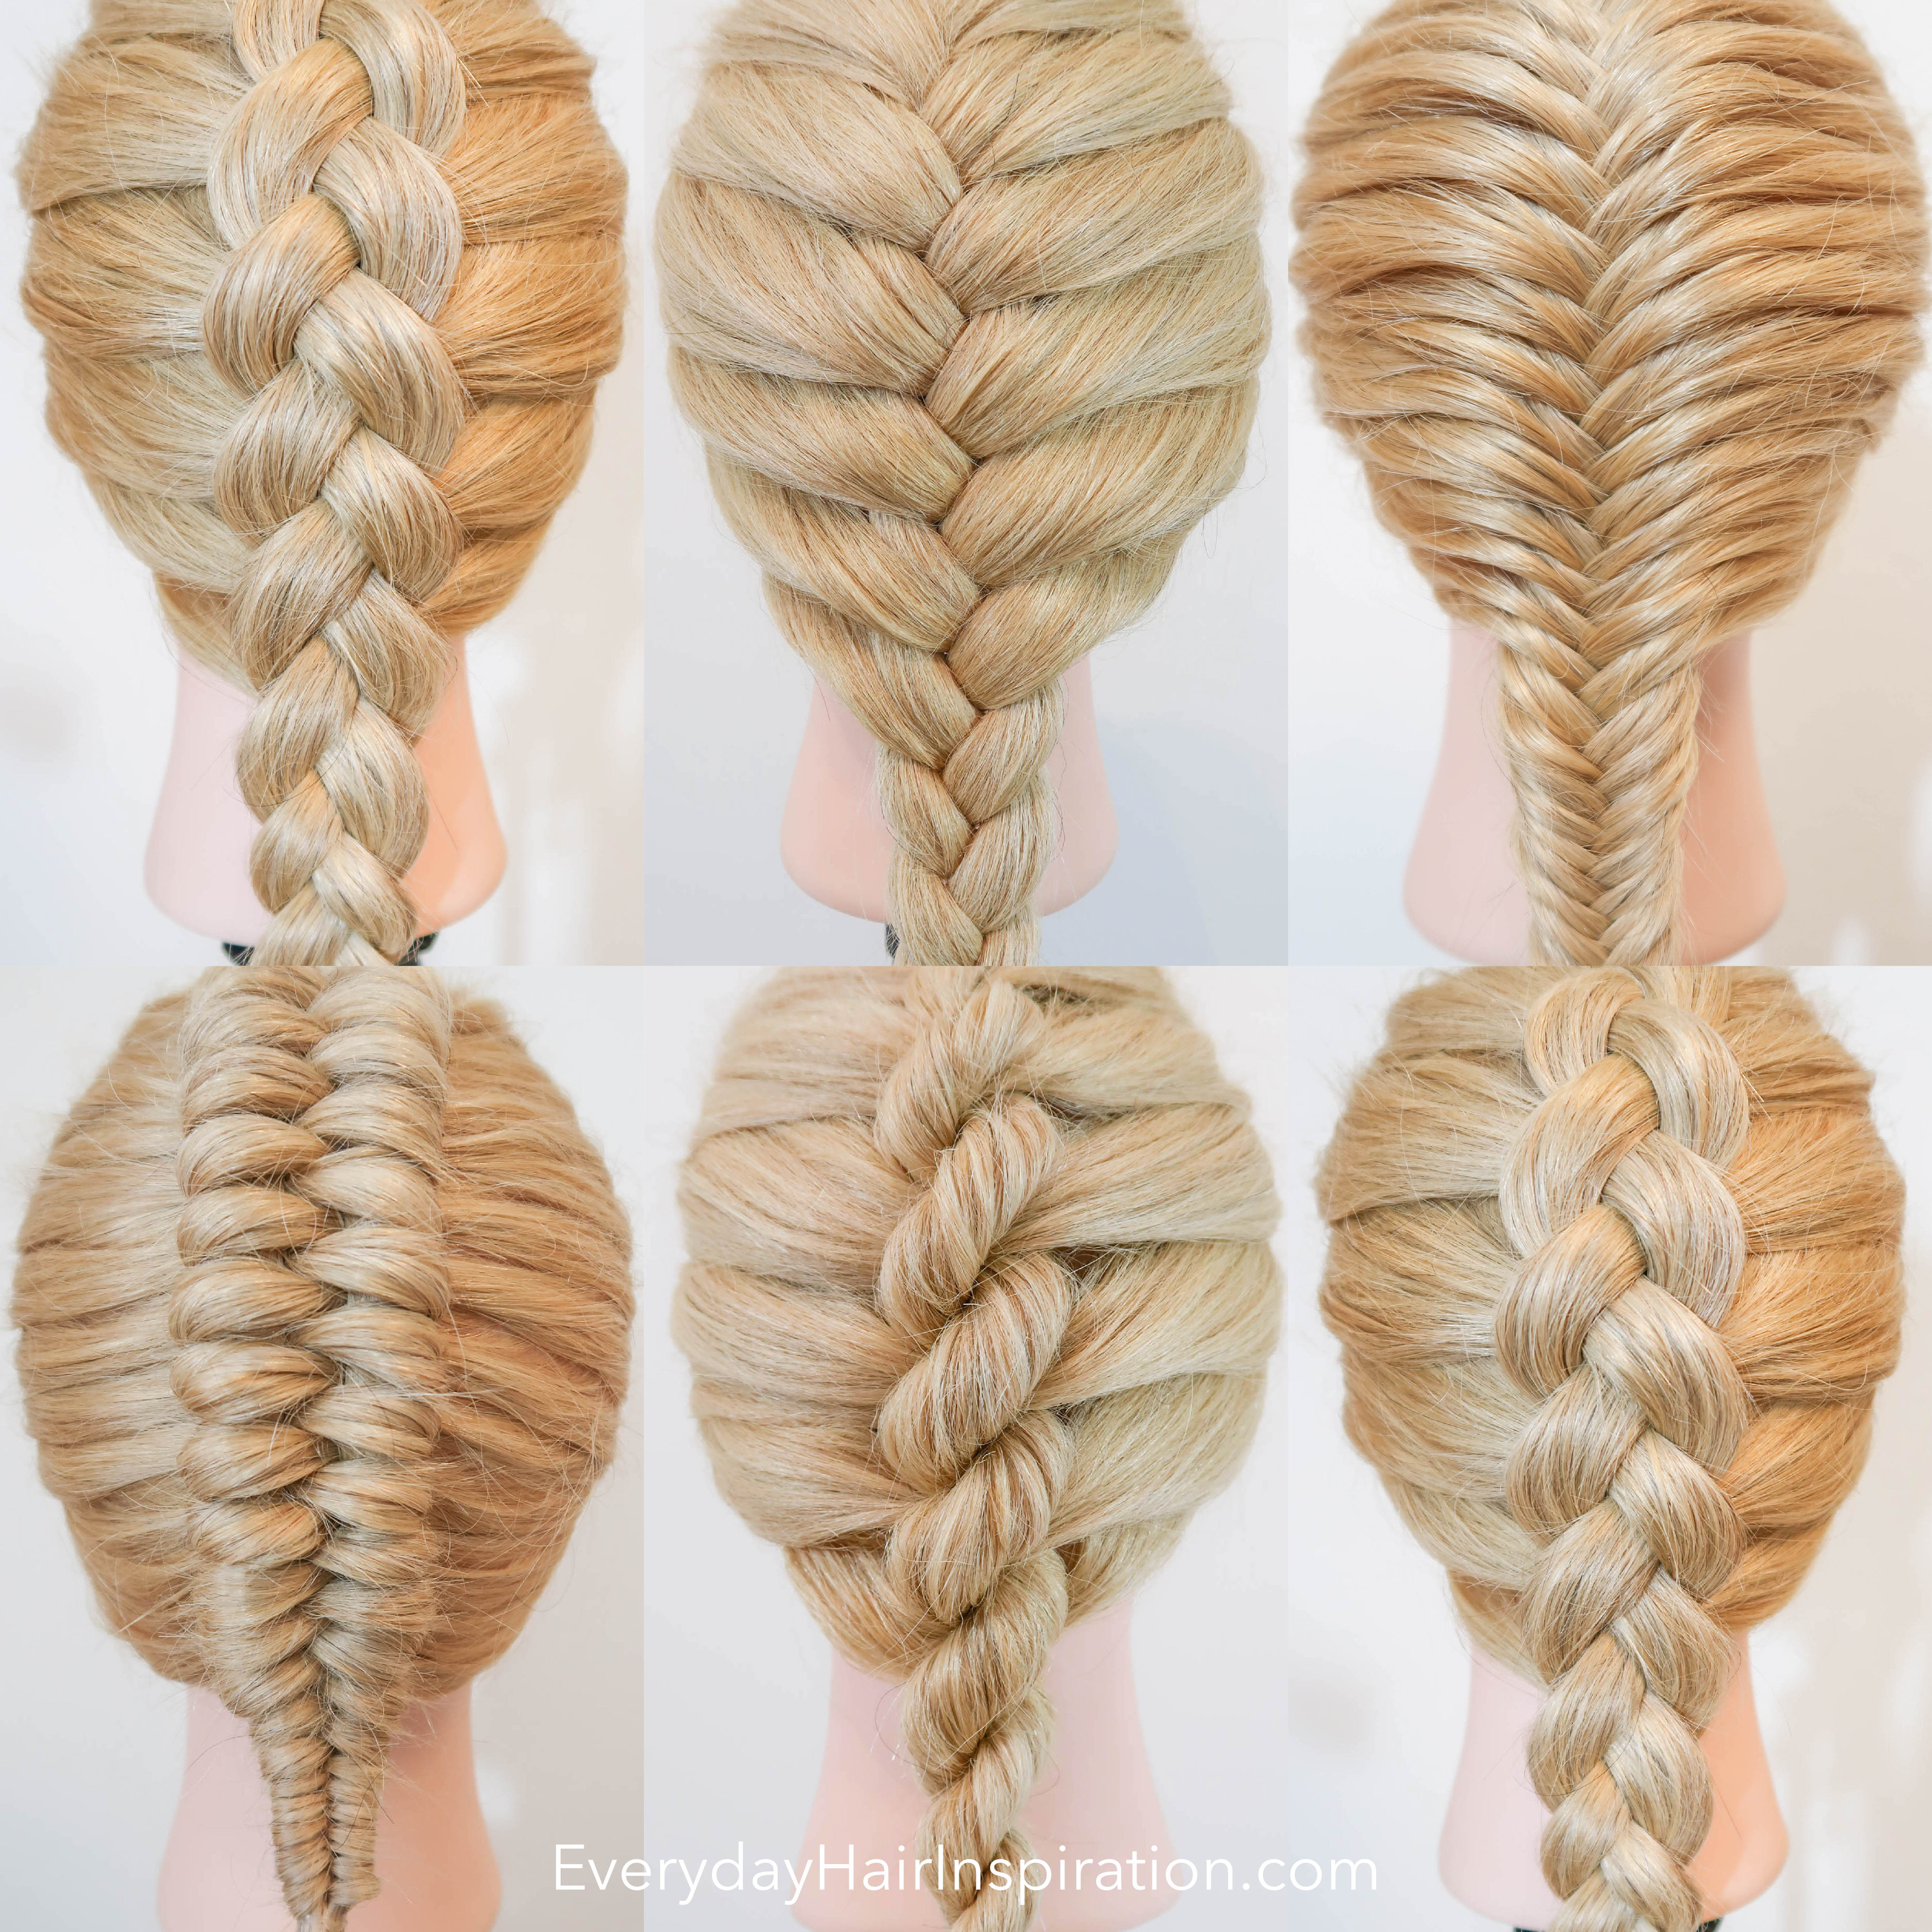 5 Quick And Easy Hairstyle Using Braid Extension 